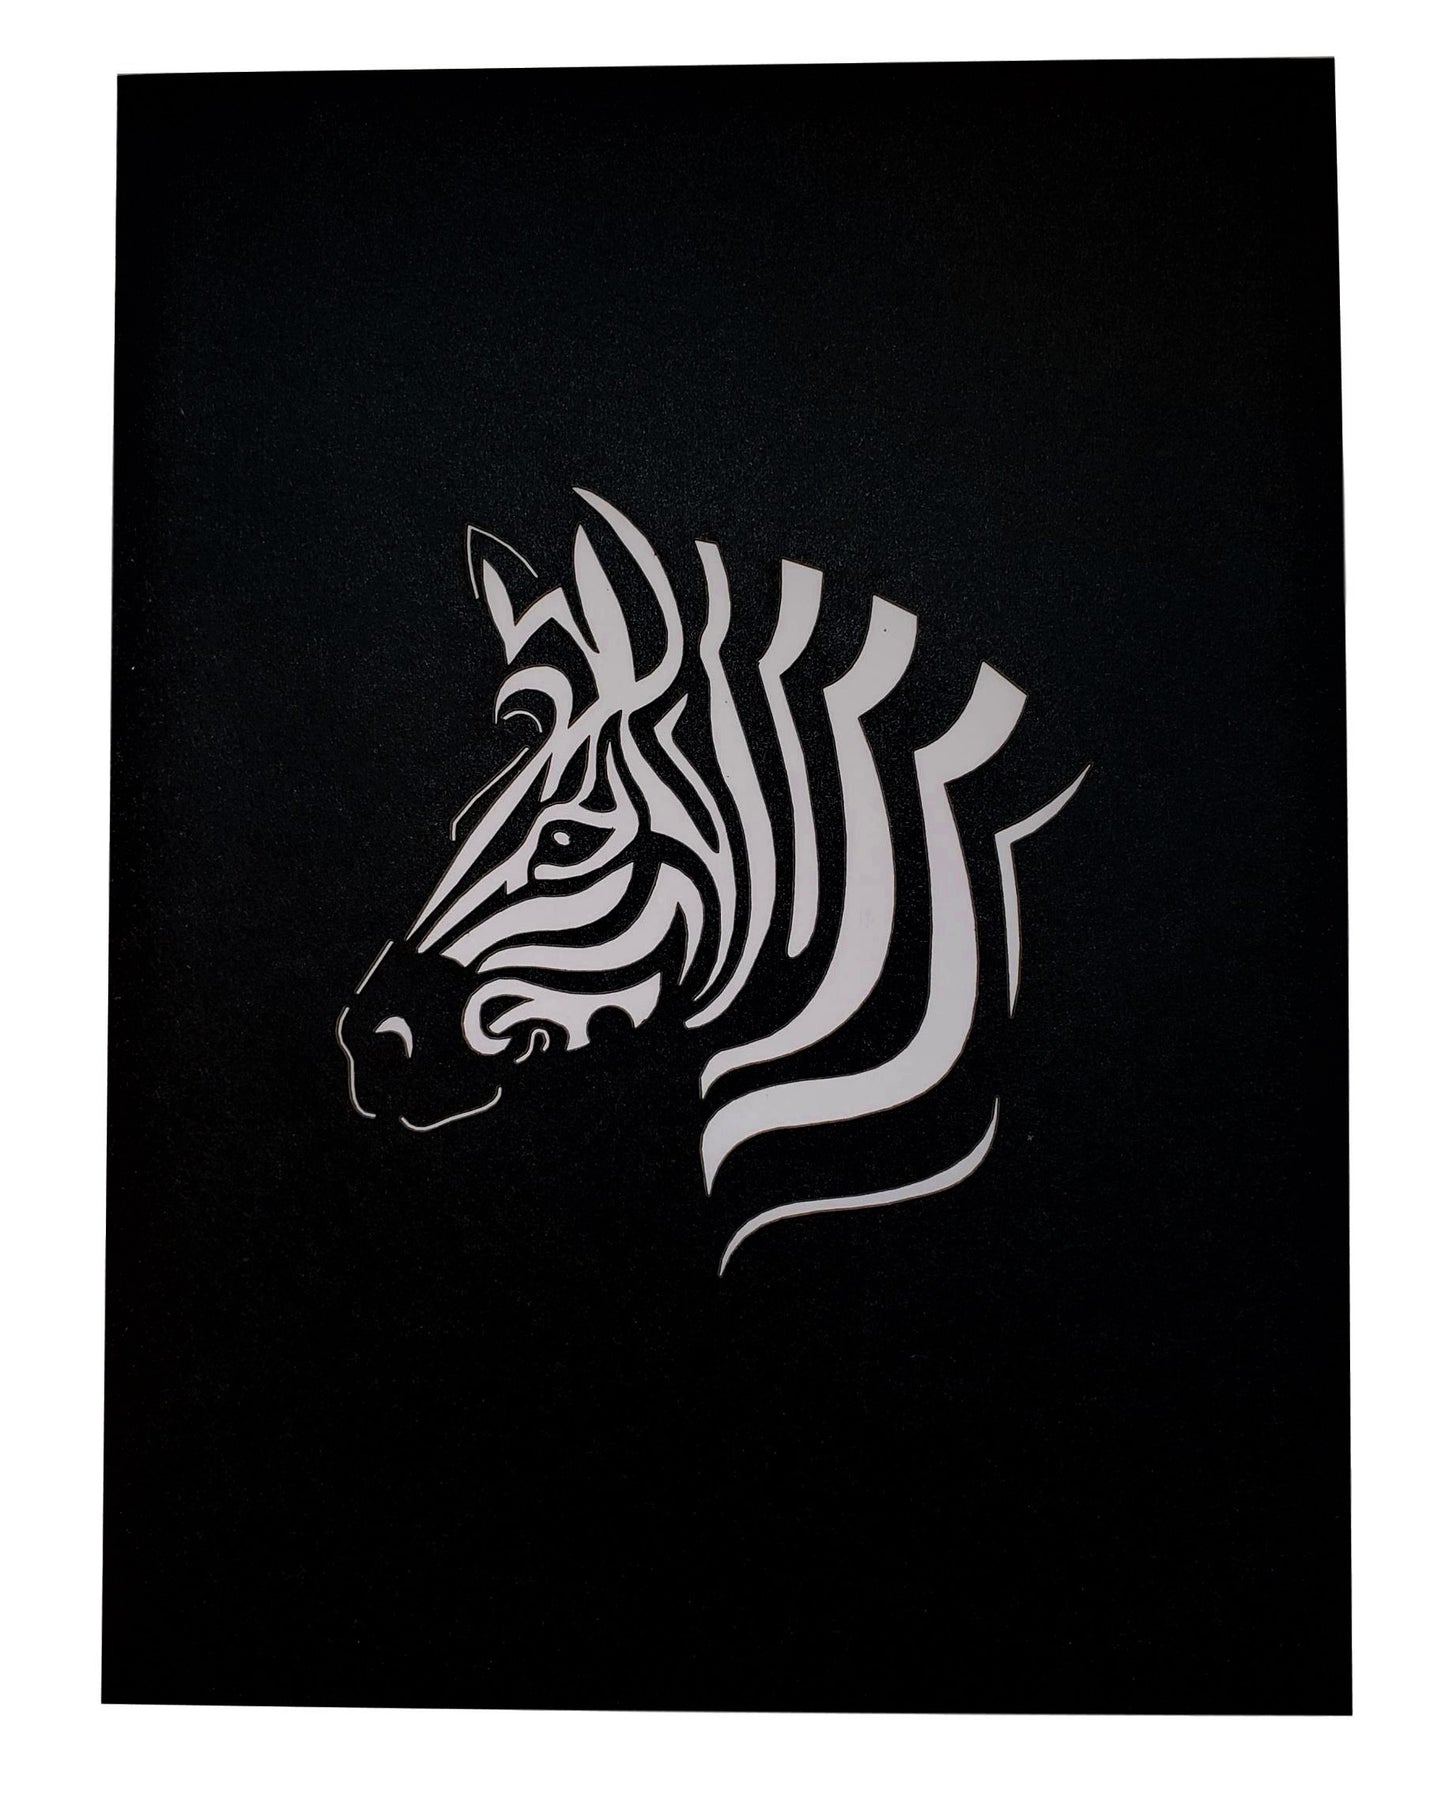 Awesome Zebras 3D Pop Up Greeting Card - All Occasion - Birthday - Blank - Celebration - Congratulat - iGifts And Cards